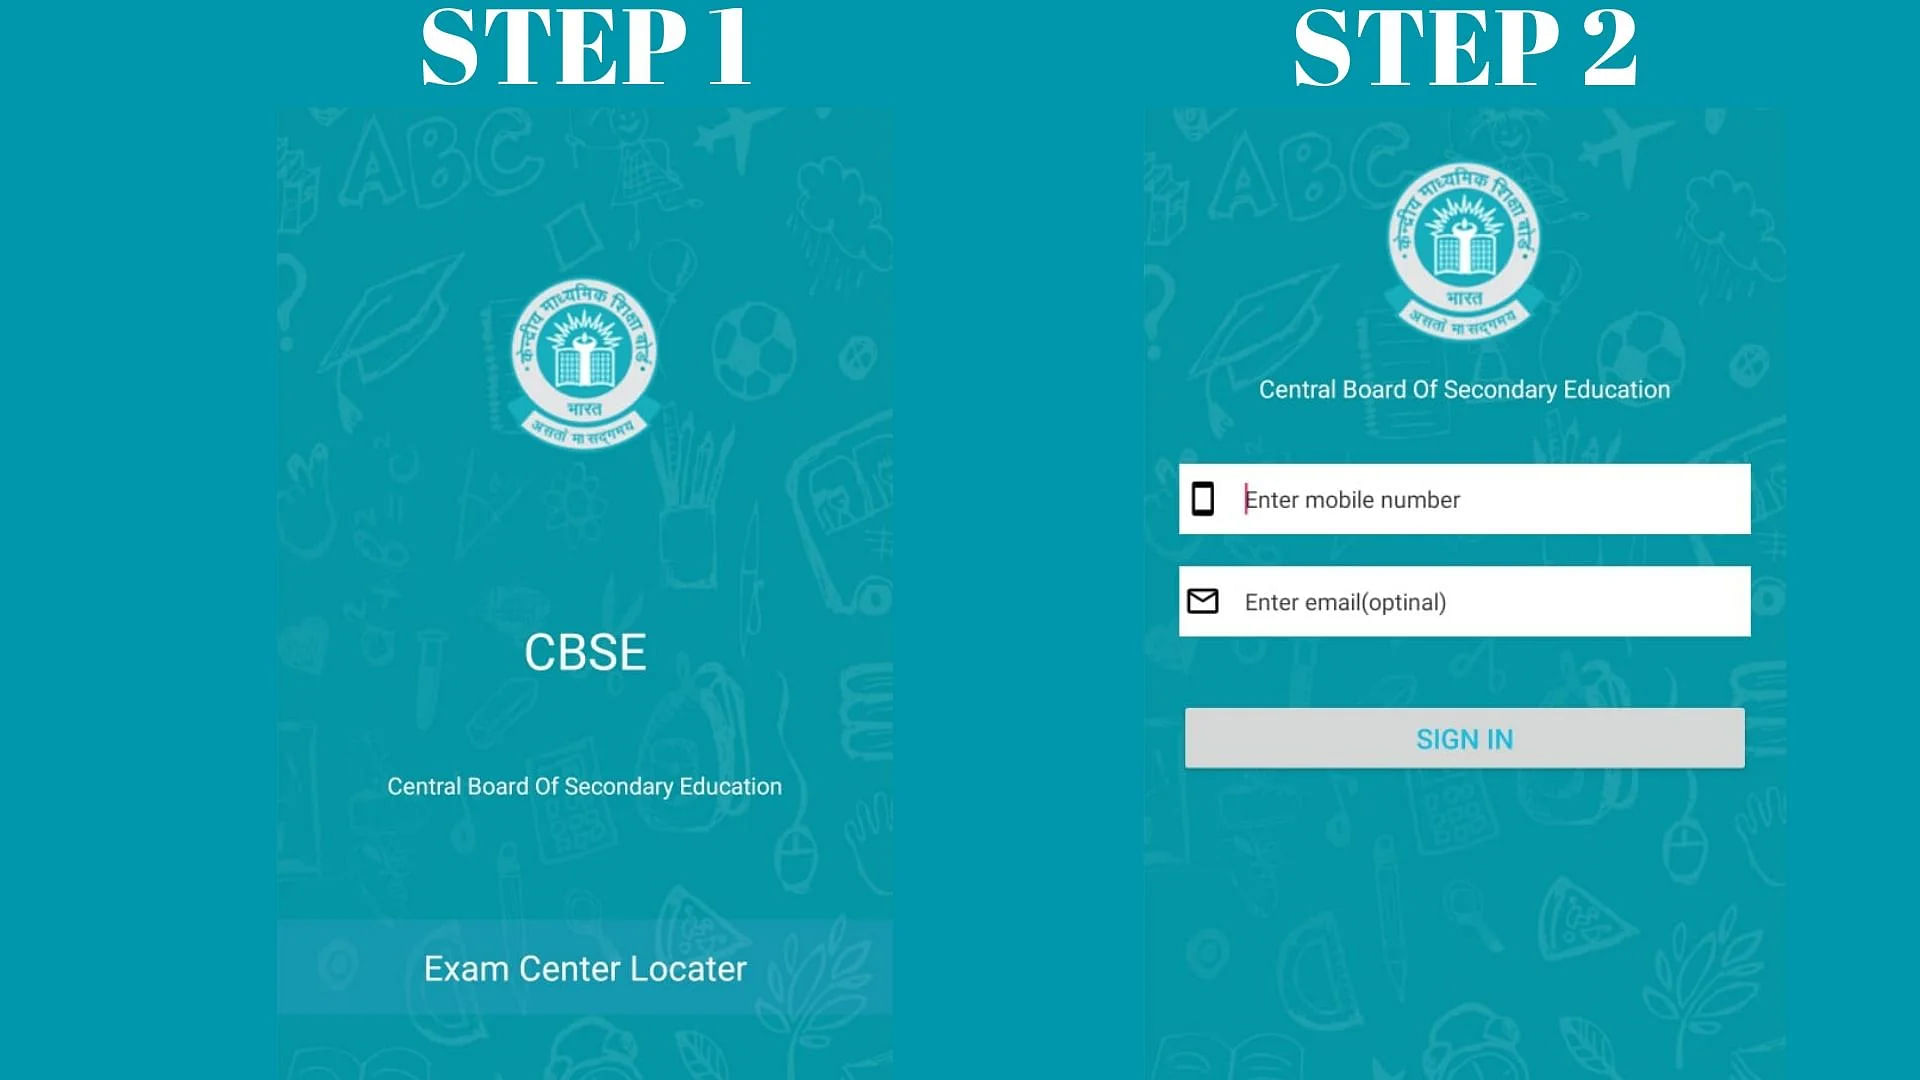 CBSE Exam Centre Location app details and how to operate it.